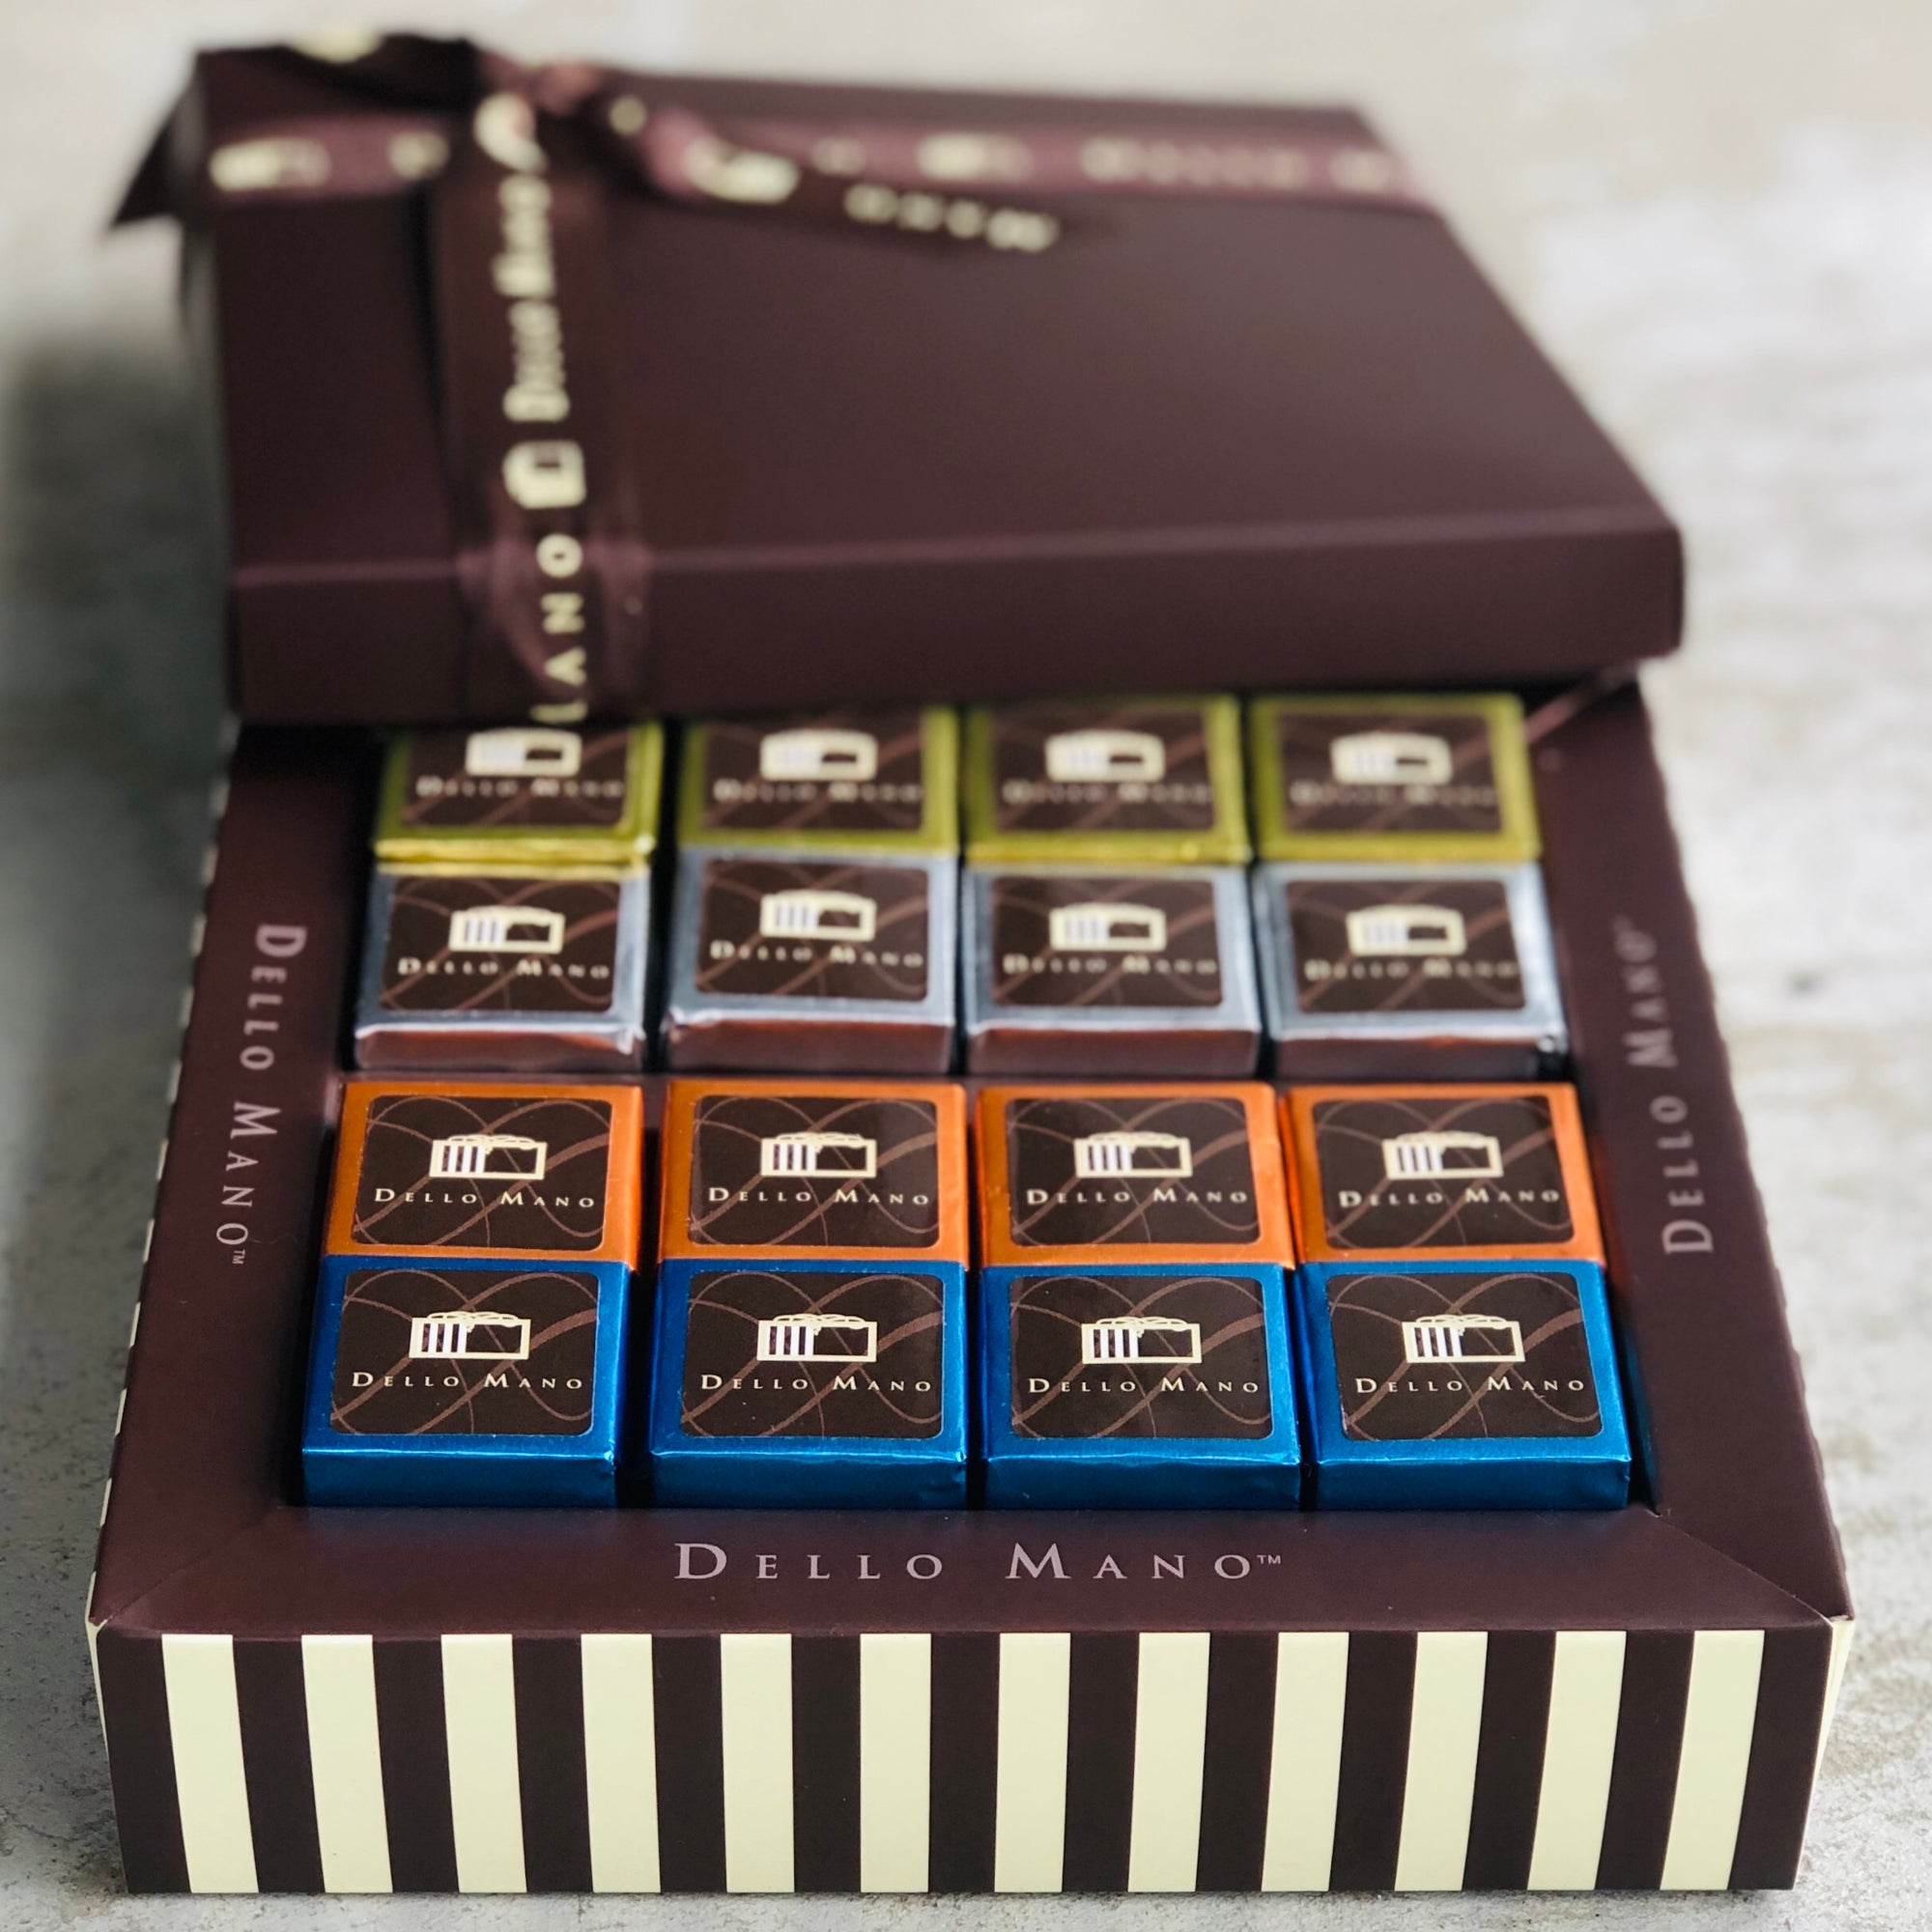 An open chocolate gift box of colourful foile wrapped brownies. A gold foiled brownie is open on top showing a rich brownie cube inside. The striped gift box says Dello Mano